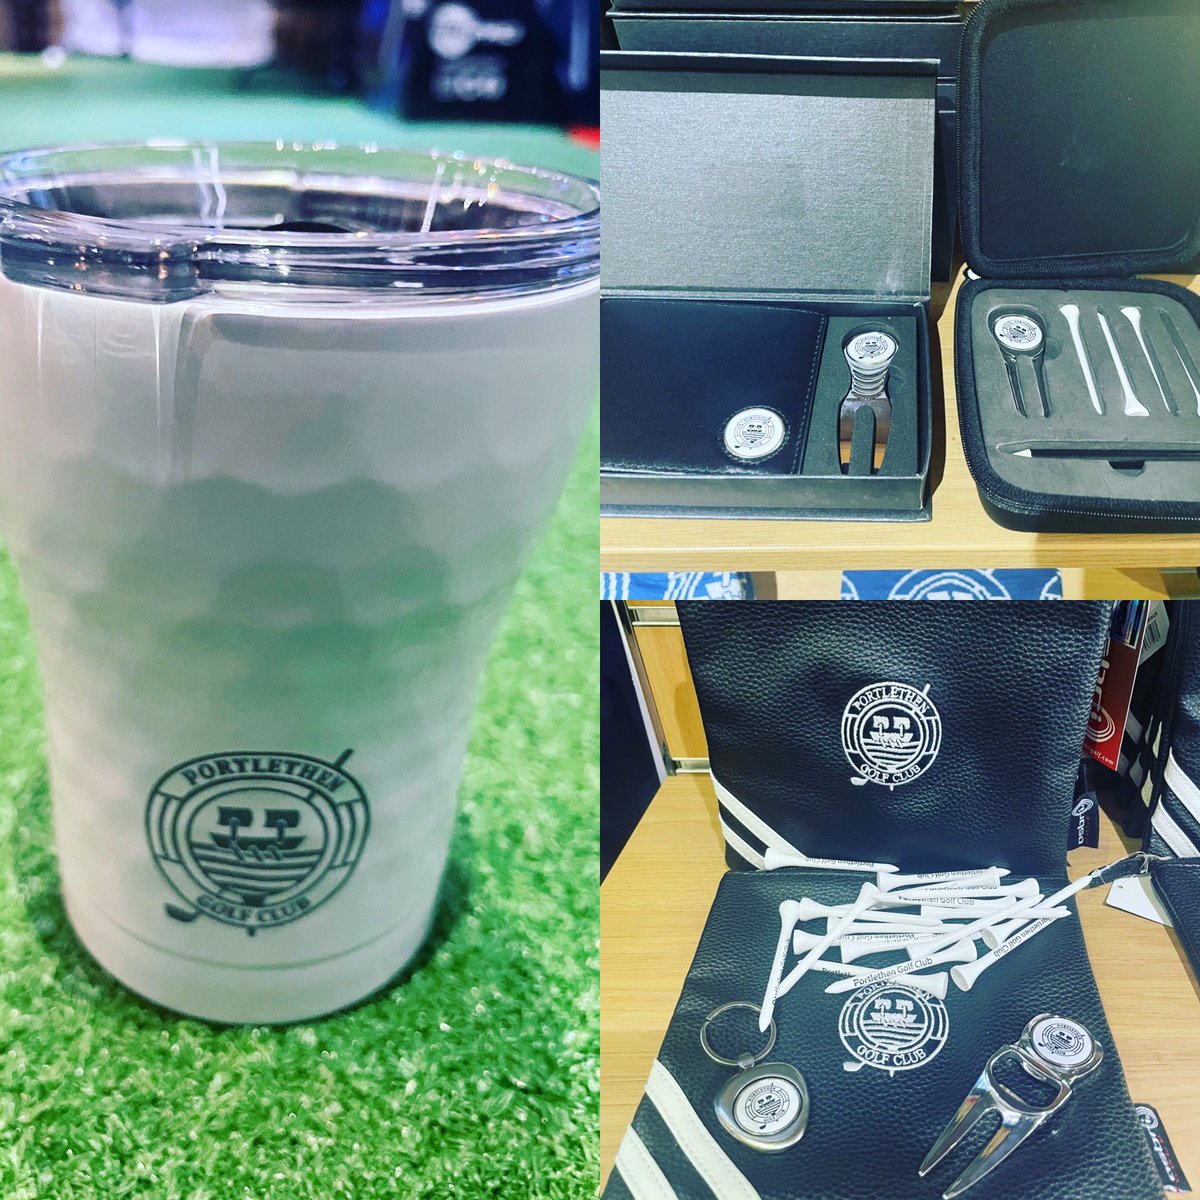 New @asbri golf goodies have arrived and will make perfect stocking fillers #portlethengolfclub #pgaprofessional #xmas